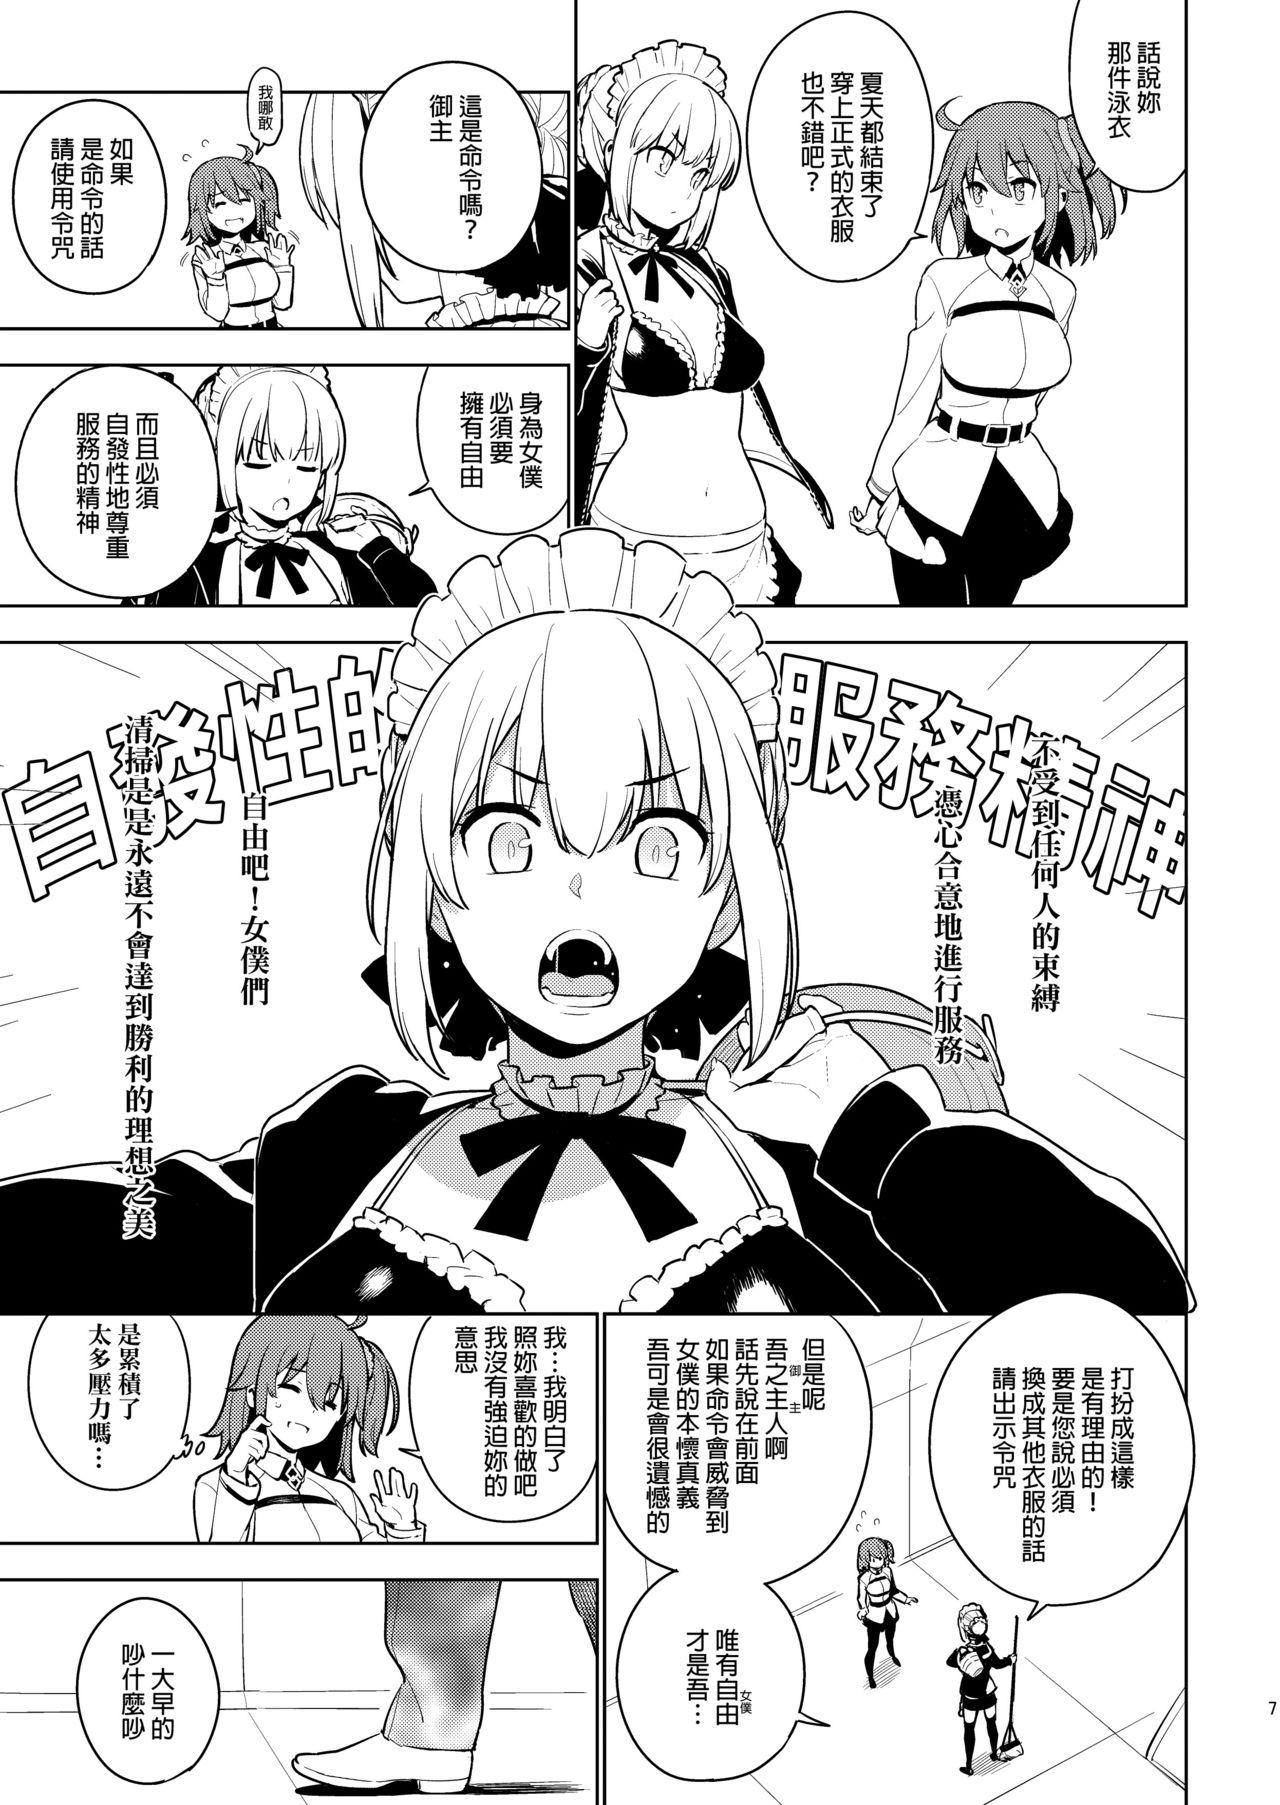 Whores DELUSION - Fate grand order Tight Pussy - Page 6